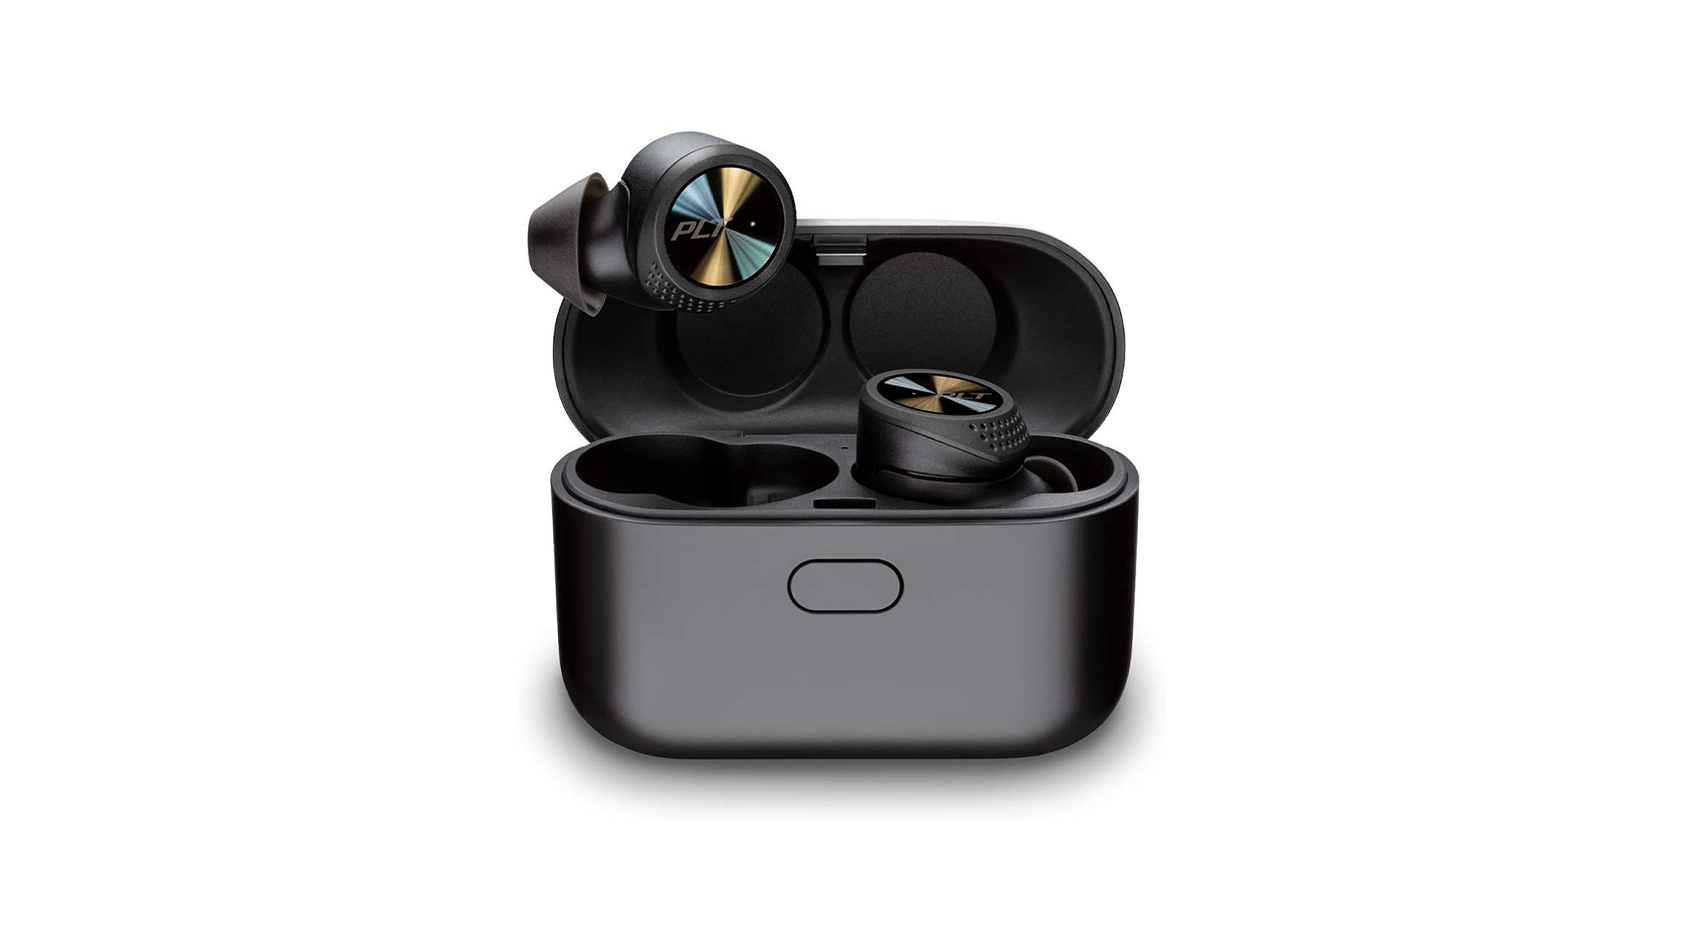 The Plantronics BackBeat PRO 5100 true wireless earbuds in black against a white background.